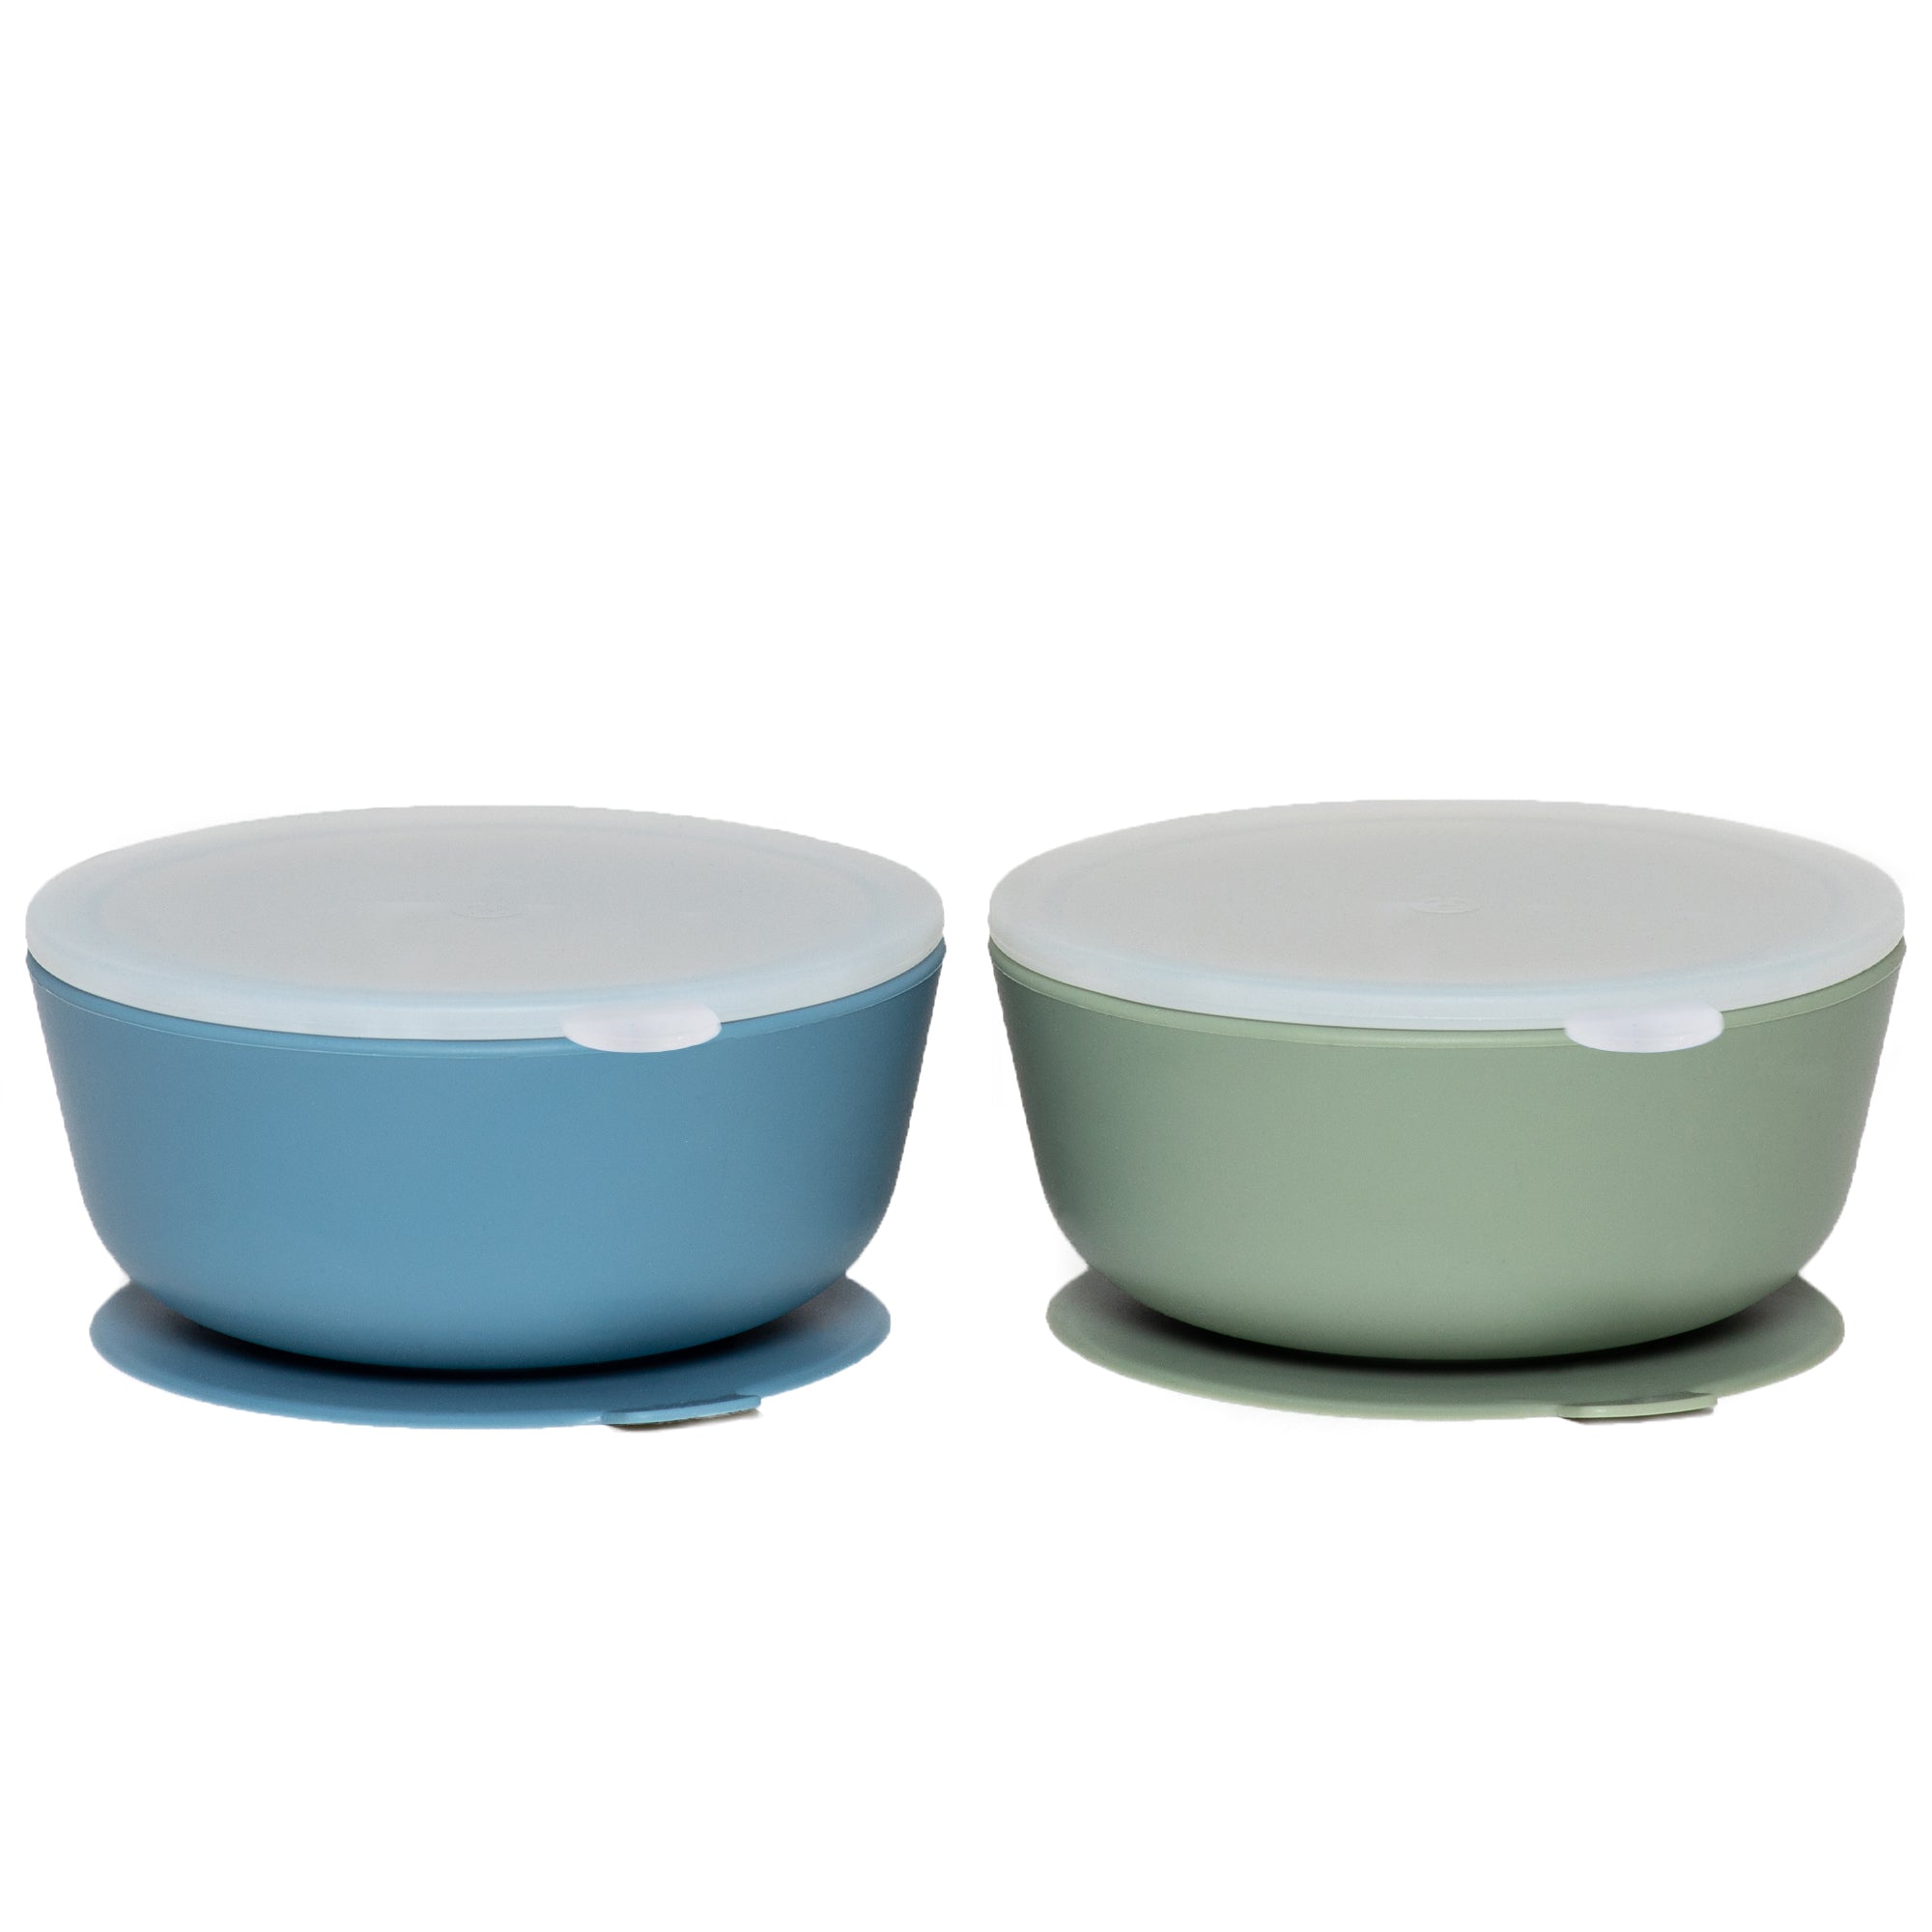 WeeSprout Bamboo Kids Bowls, Set of Four 10 oz Kid-Sized Bamboo Bowls,  Dishwasher Safe Kid Bowls (Blue, Green, Gray, & Beige)